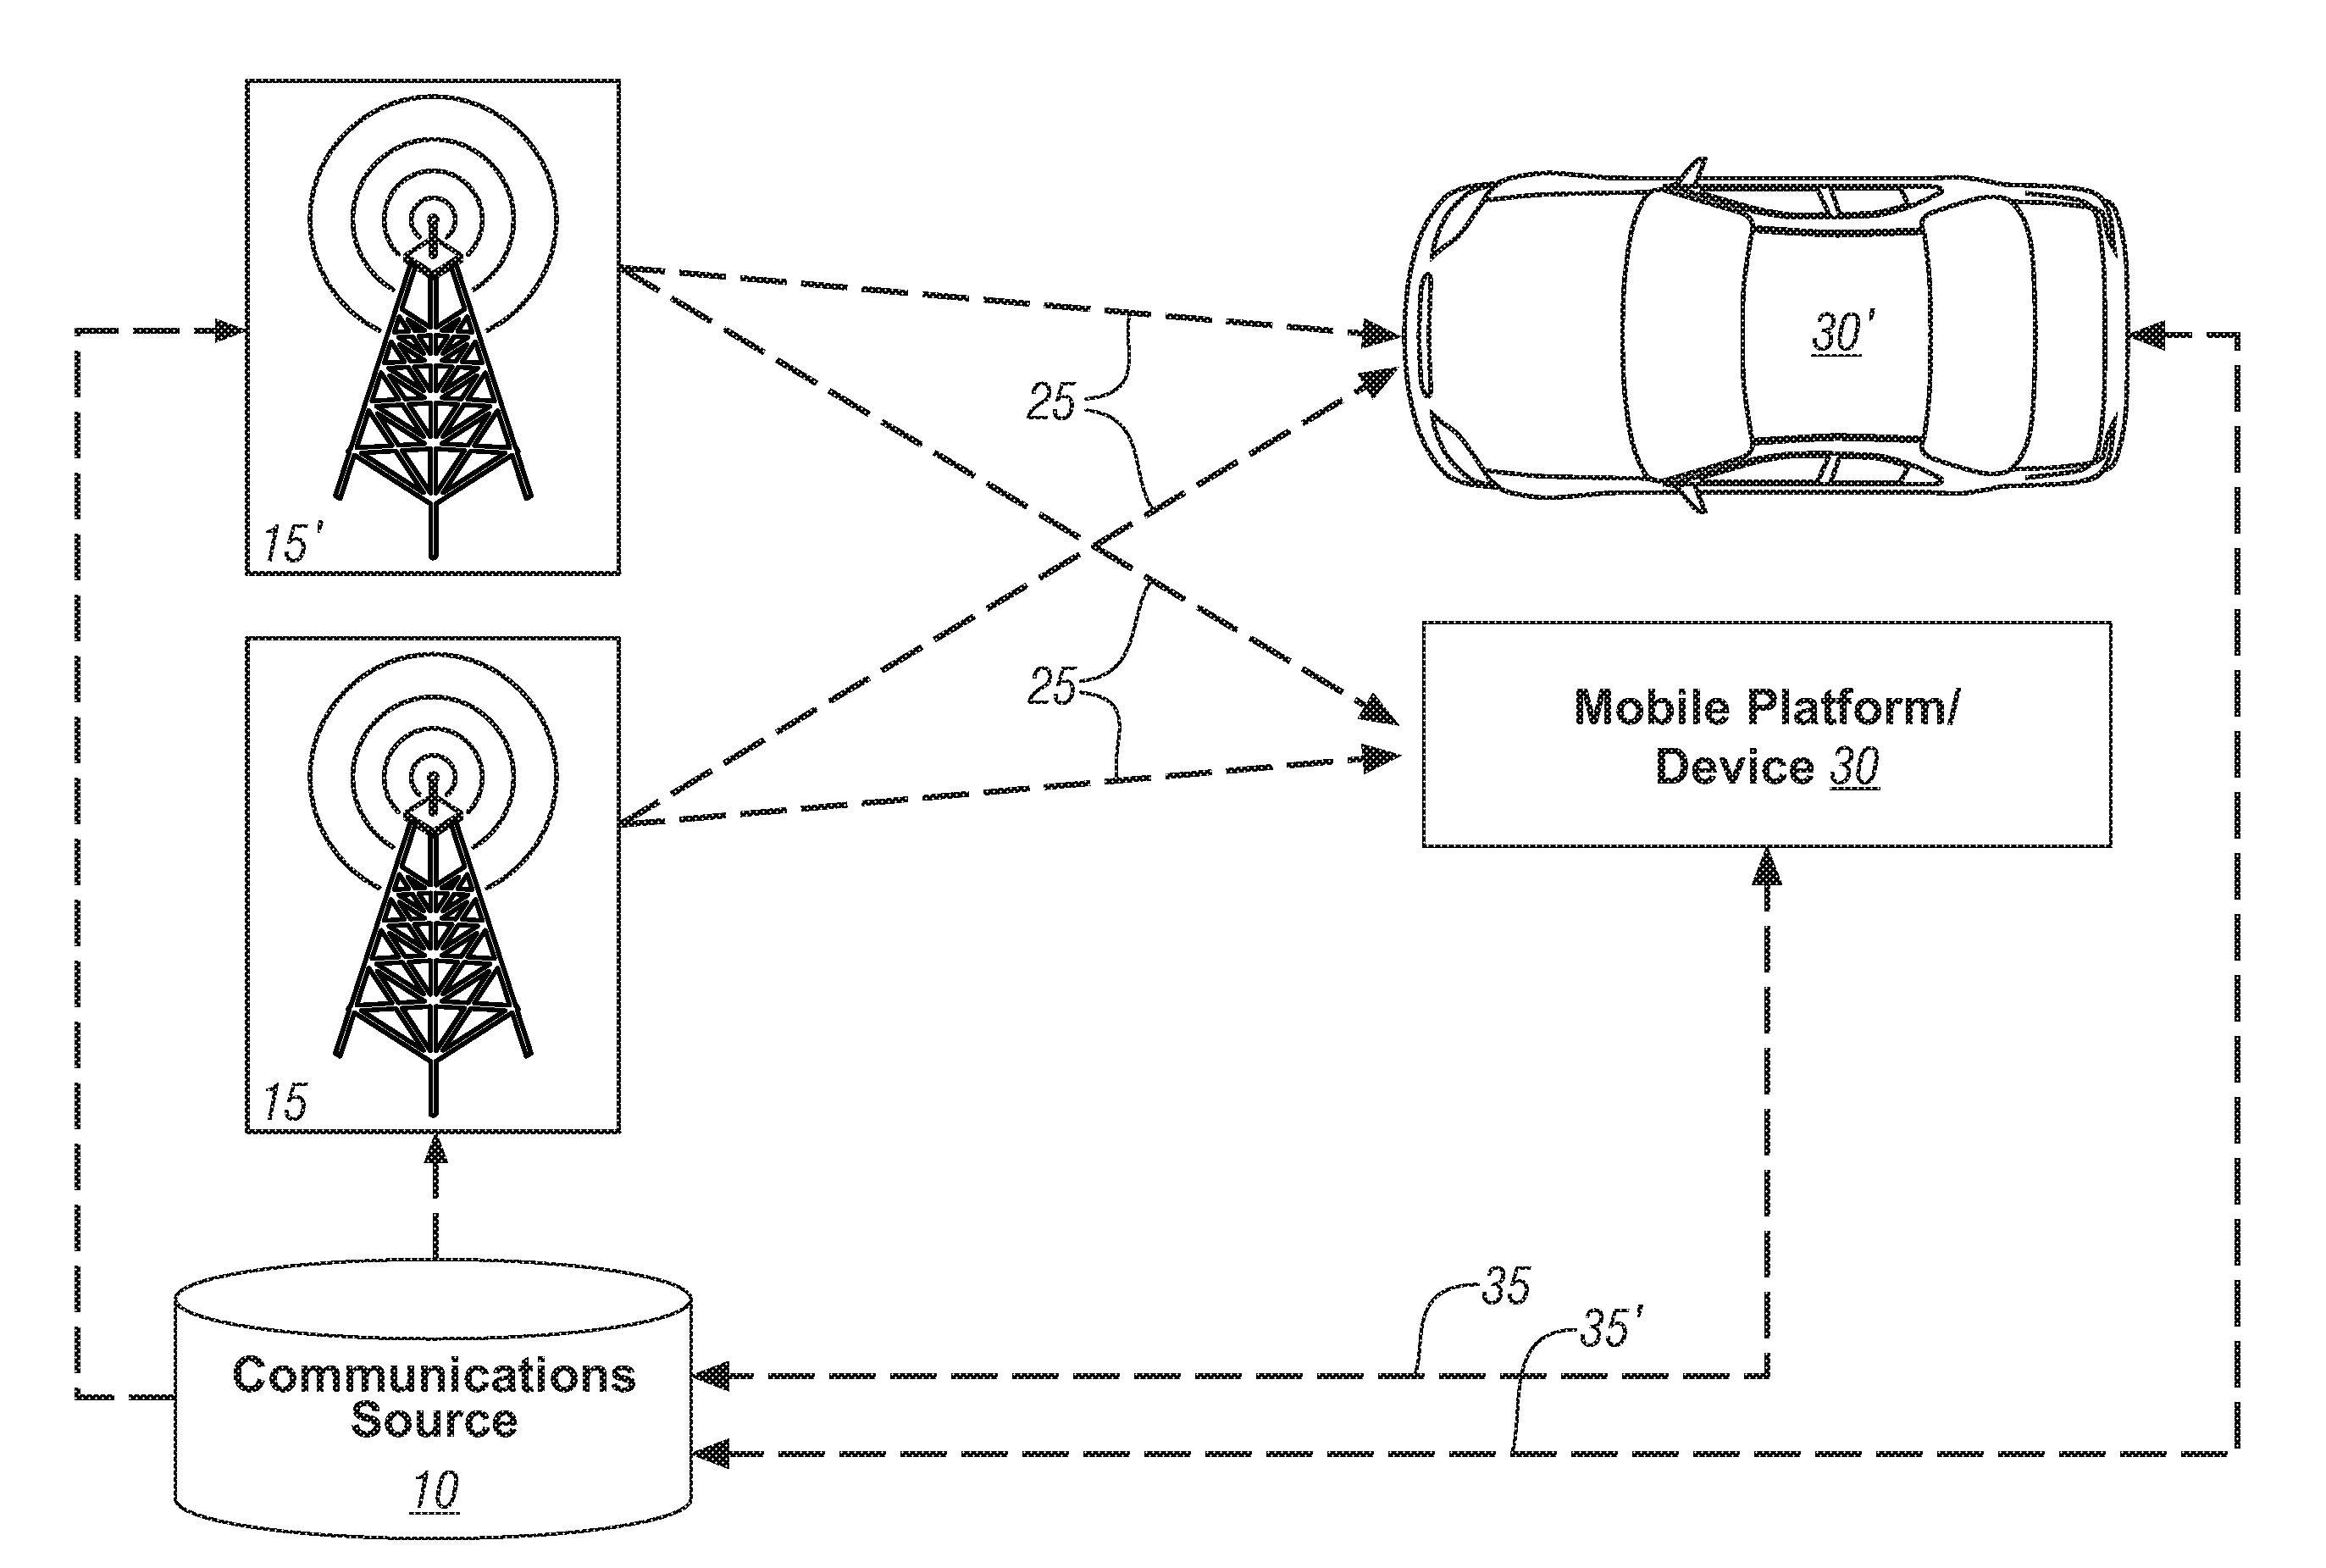 Method and system for communicating information to a user of a mobile platform via broadcast services